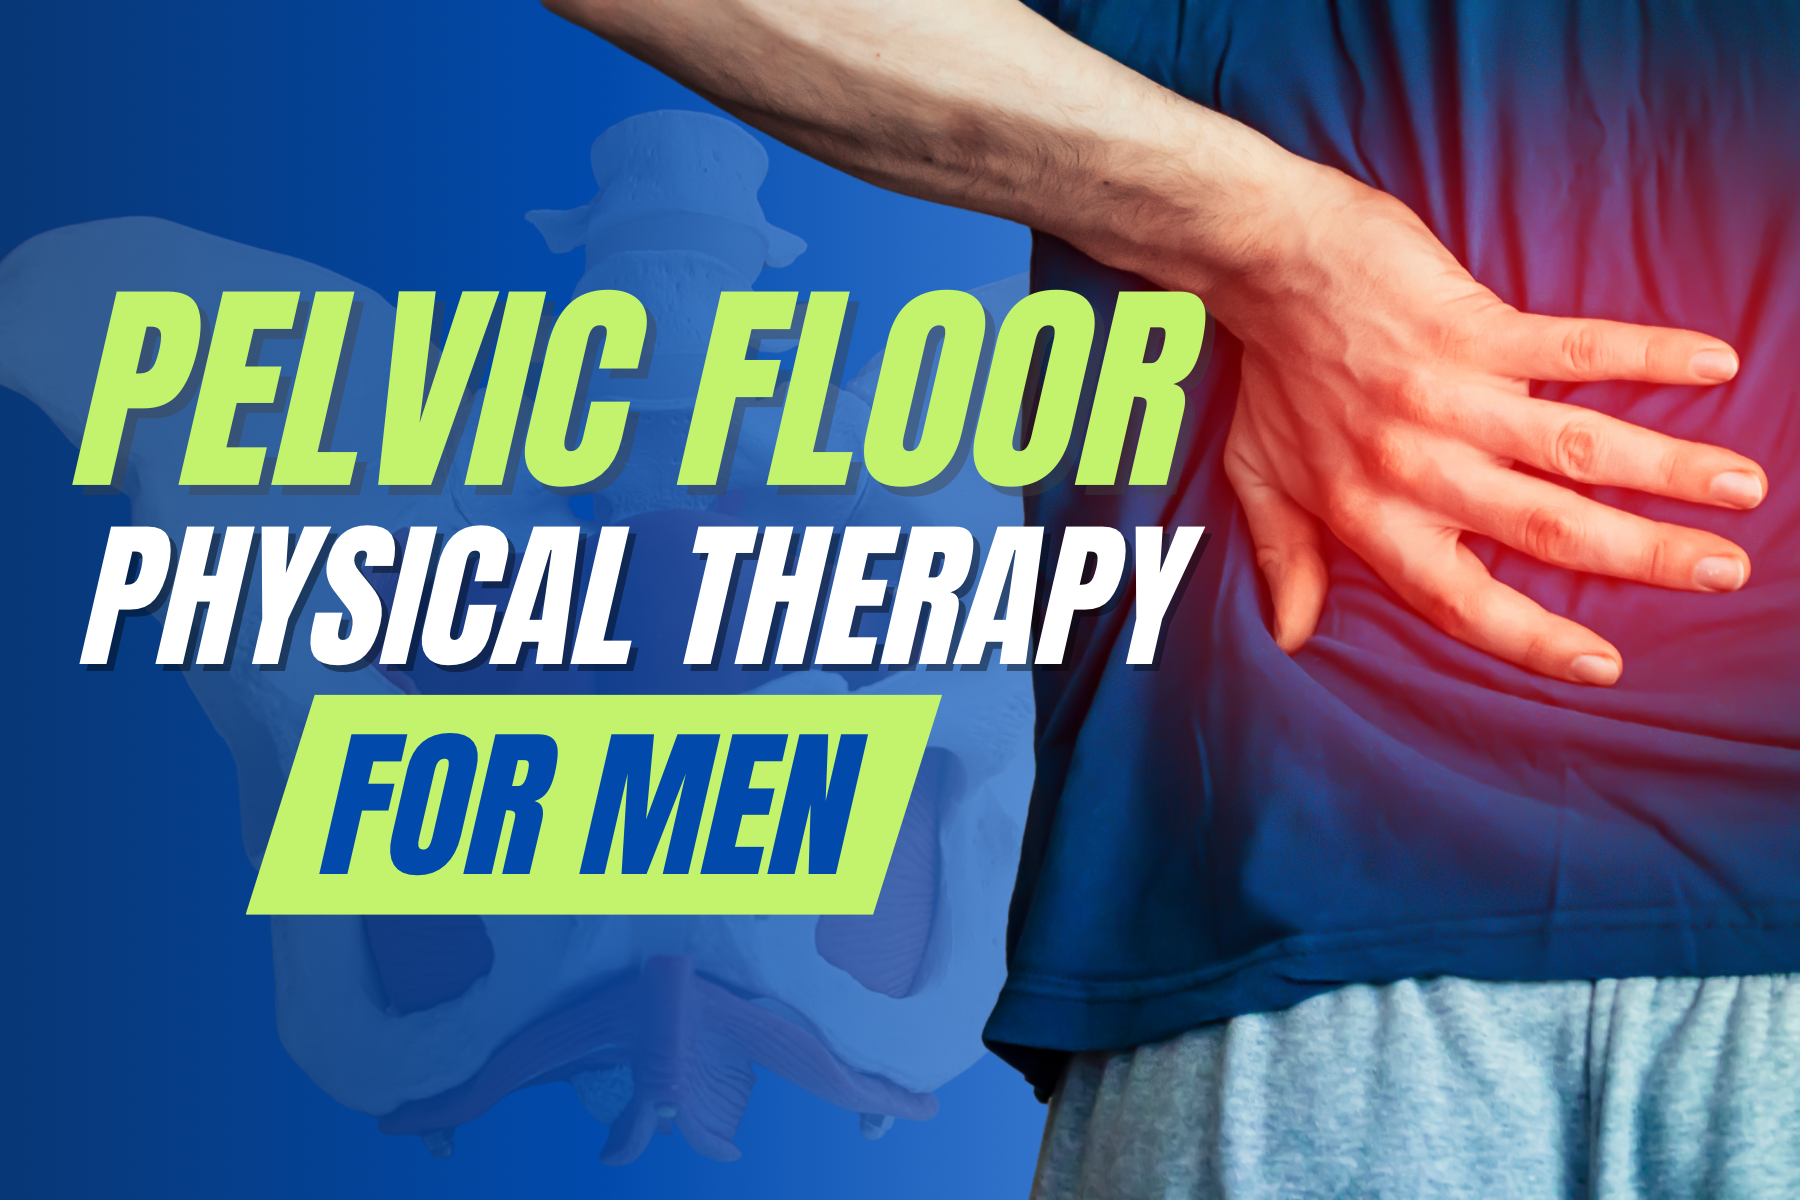 Pelvic floor physical therapy for men